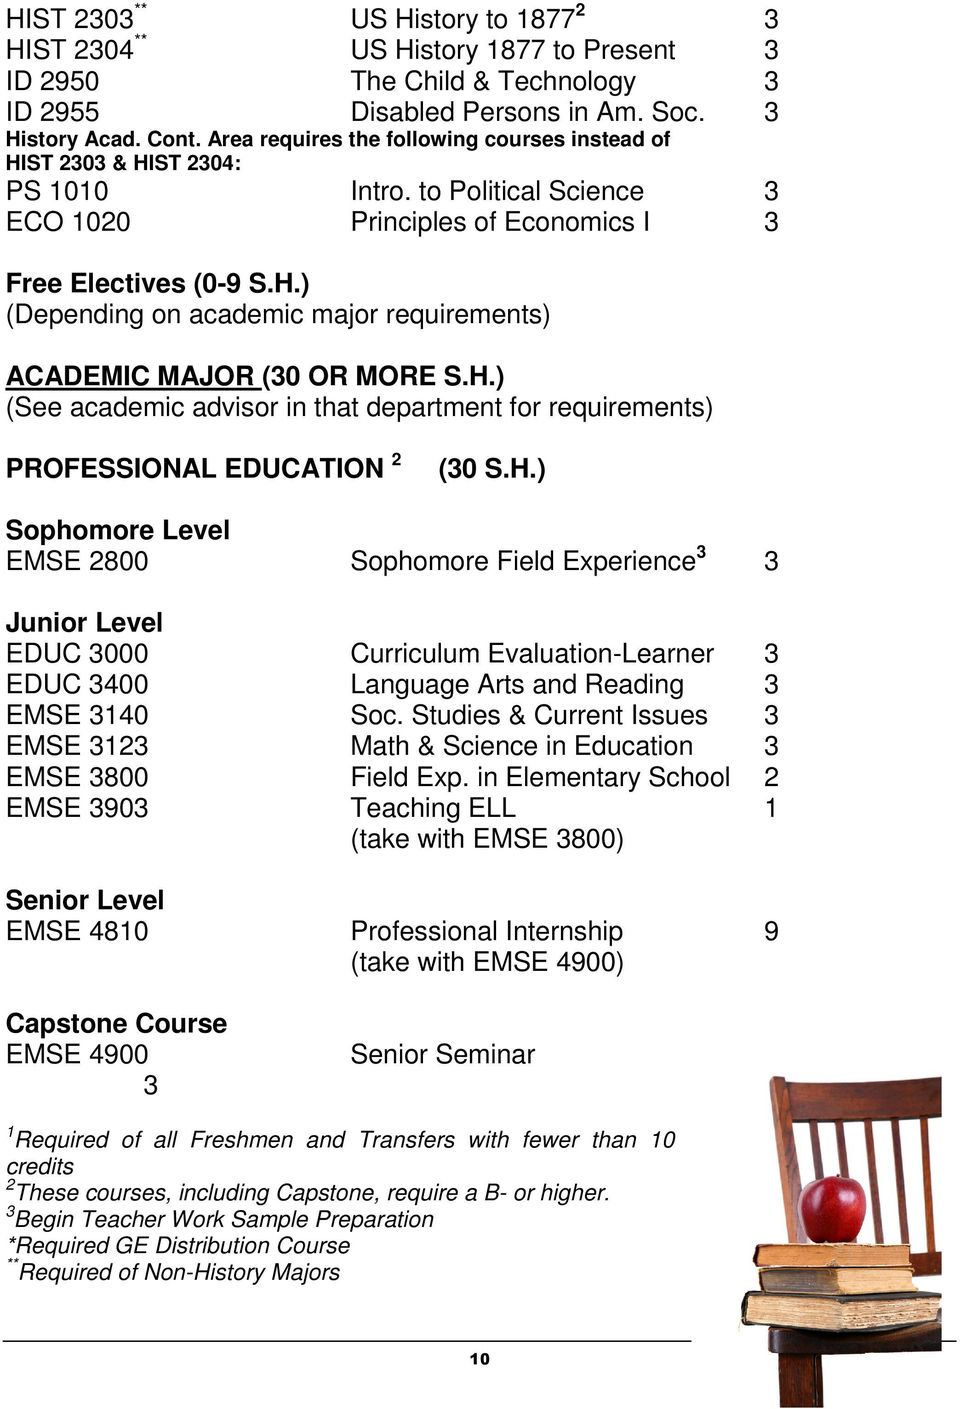 H.) (See academic advisor in that department for requirements) OFESSIONAL EDUCATIO PROFESSIONAL EDUCATION 2 (30 S.H.) Sophomore Level EMSE 2800 Sophomore Field Experience 3 3 Junior Level EDUC 3000 Curriculum Evaluation-Learner 3 EDUC 3400 Language Arts and Reading 3 EMSE 3140 Soc.